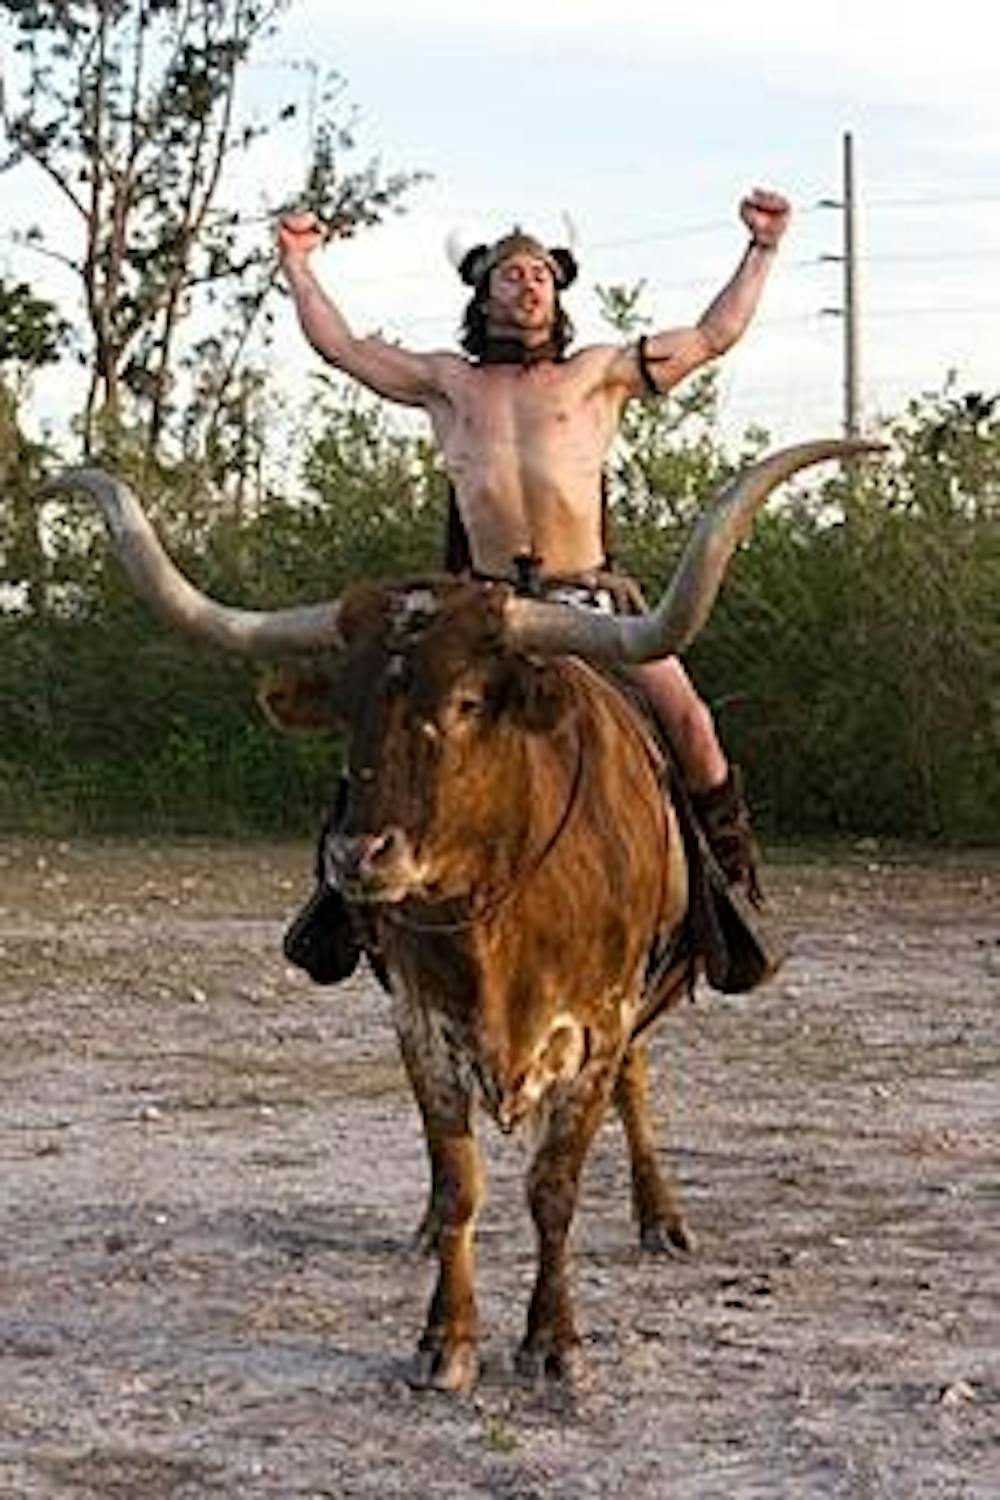 Wildlife pornographer Chris Pontius is one with the longhorn in the new 'Jackass' film installment.